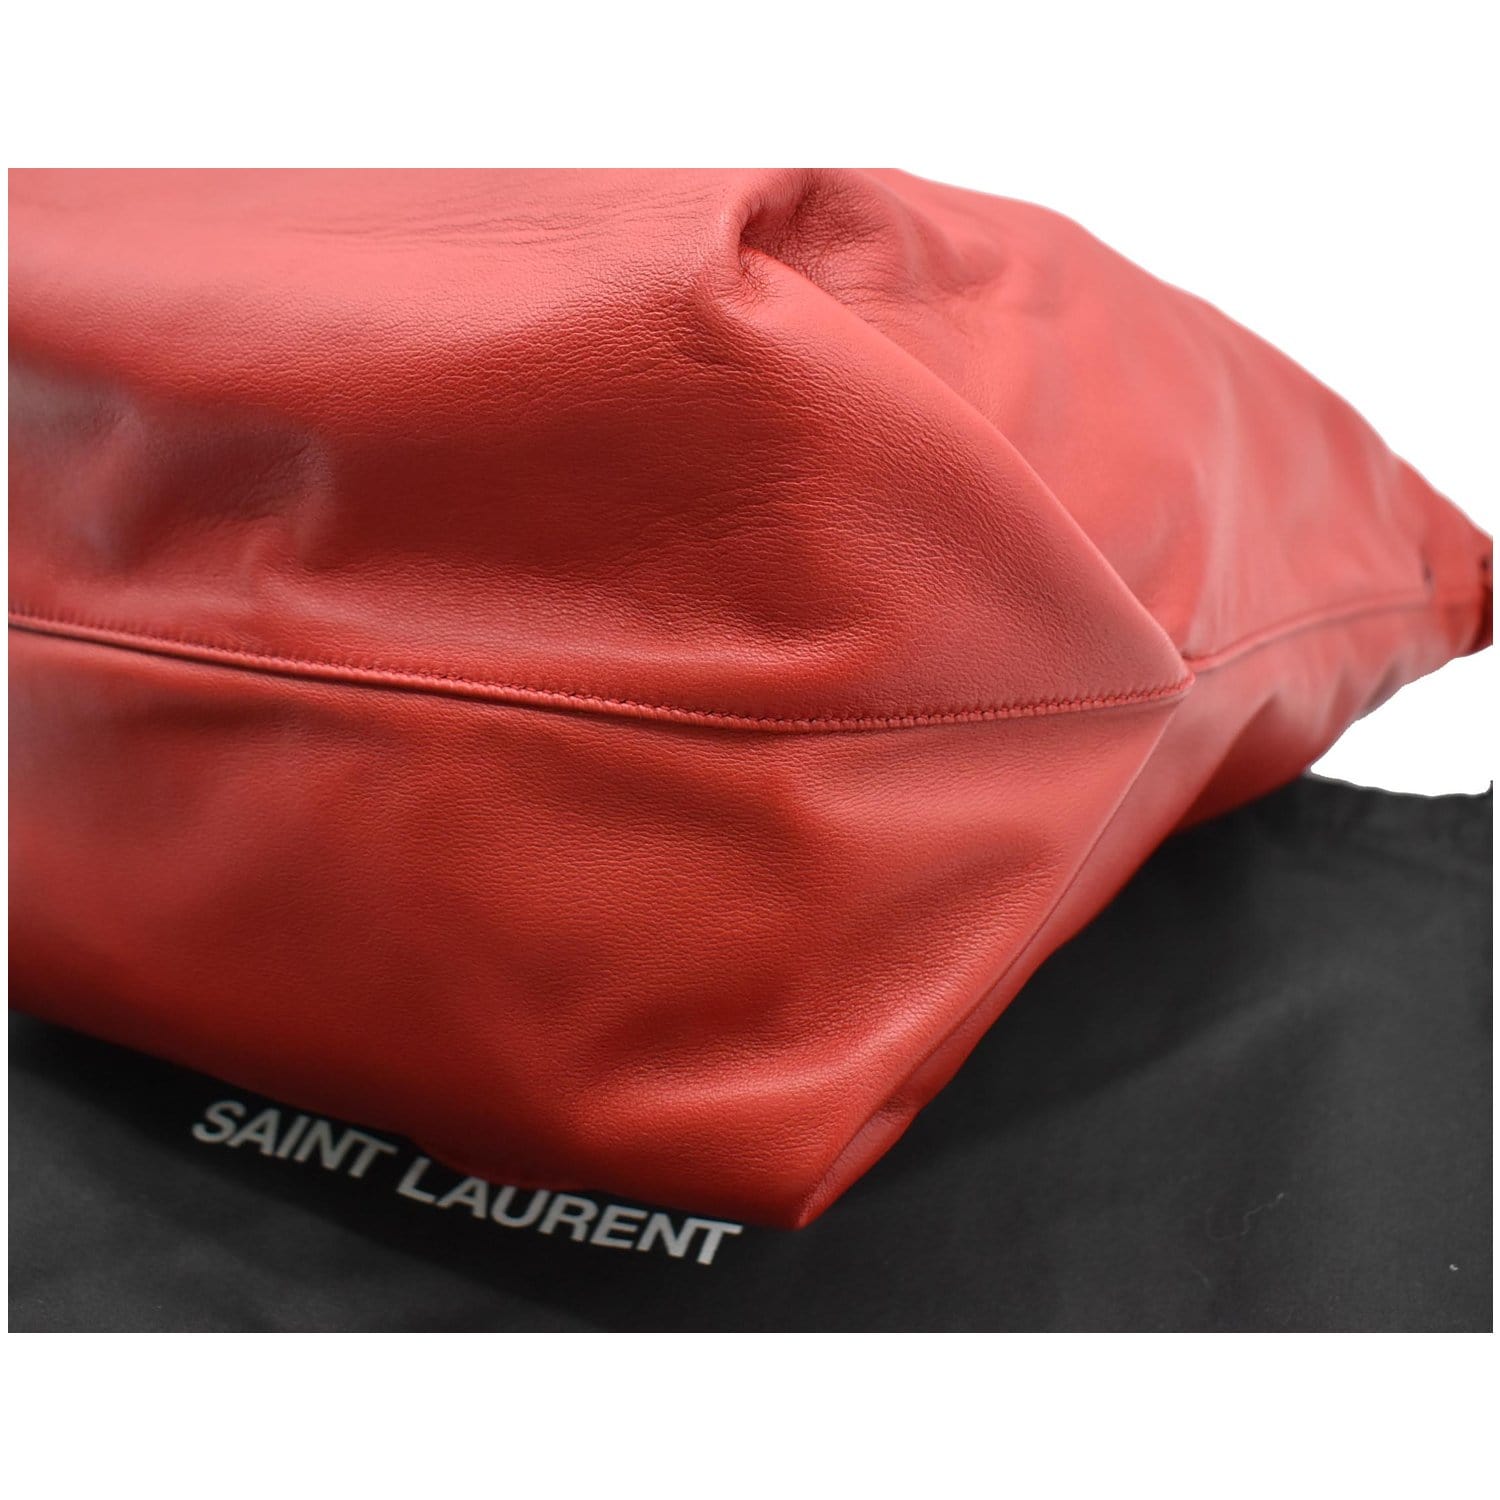 Saint Laurent LouLou Toy Strap Bag in Quilted Y Leather Red Cranberry  Crossbody | eBay